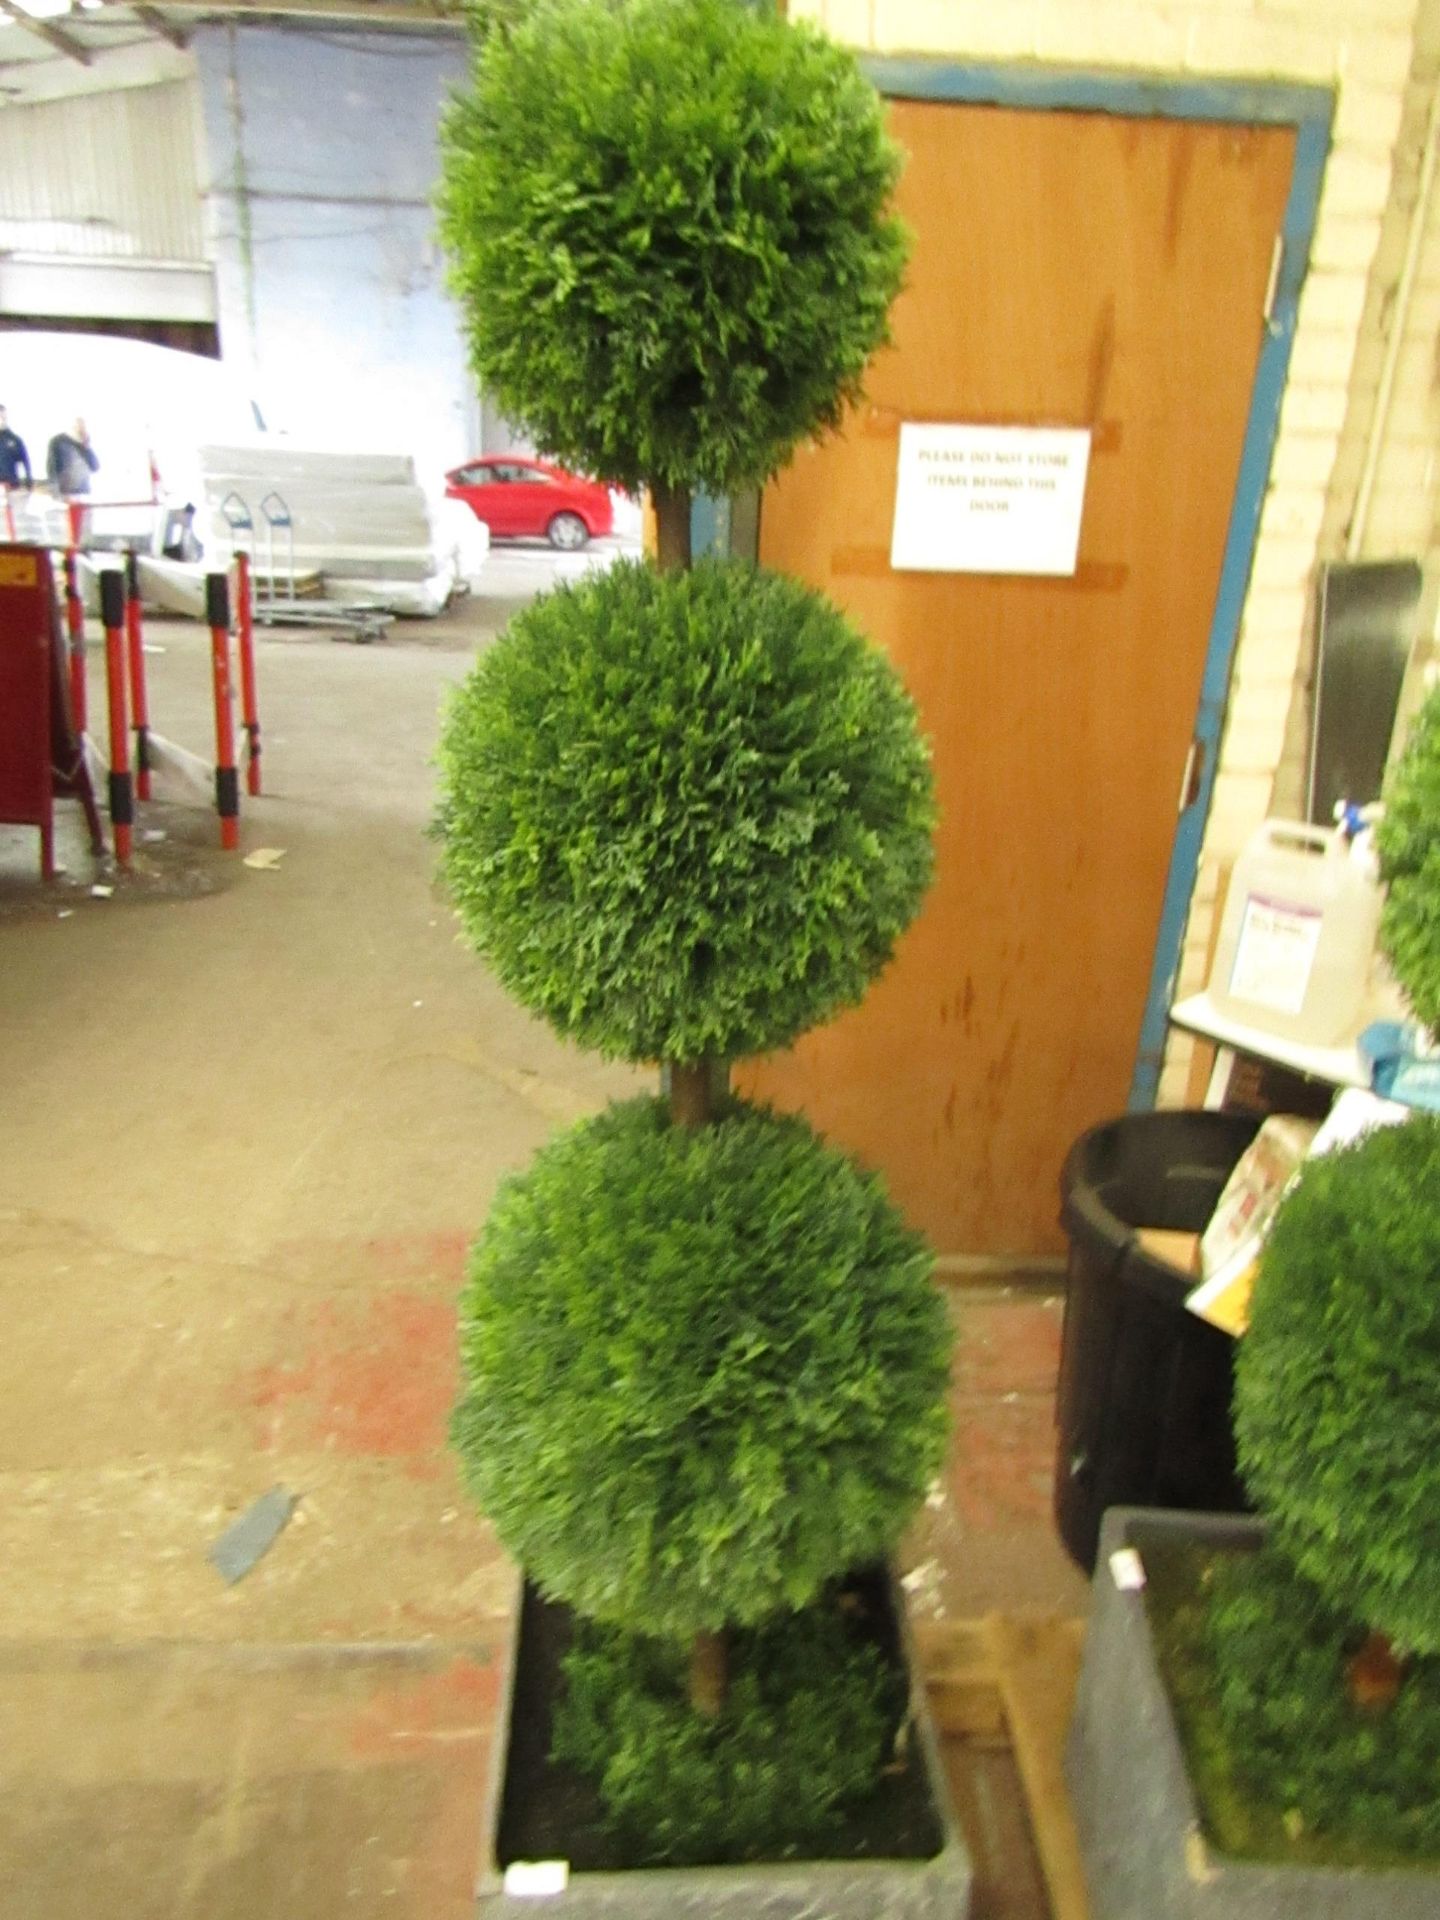 Large Outdoor Artificial 3 Ball Topiary Tree, With Large Concrete Effect Planter - Used Condition,